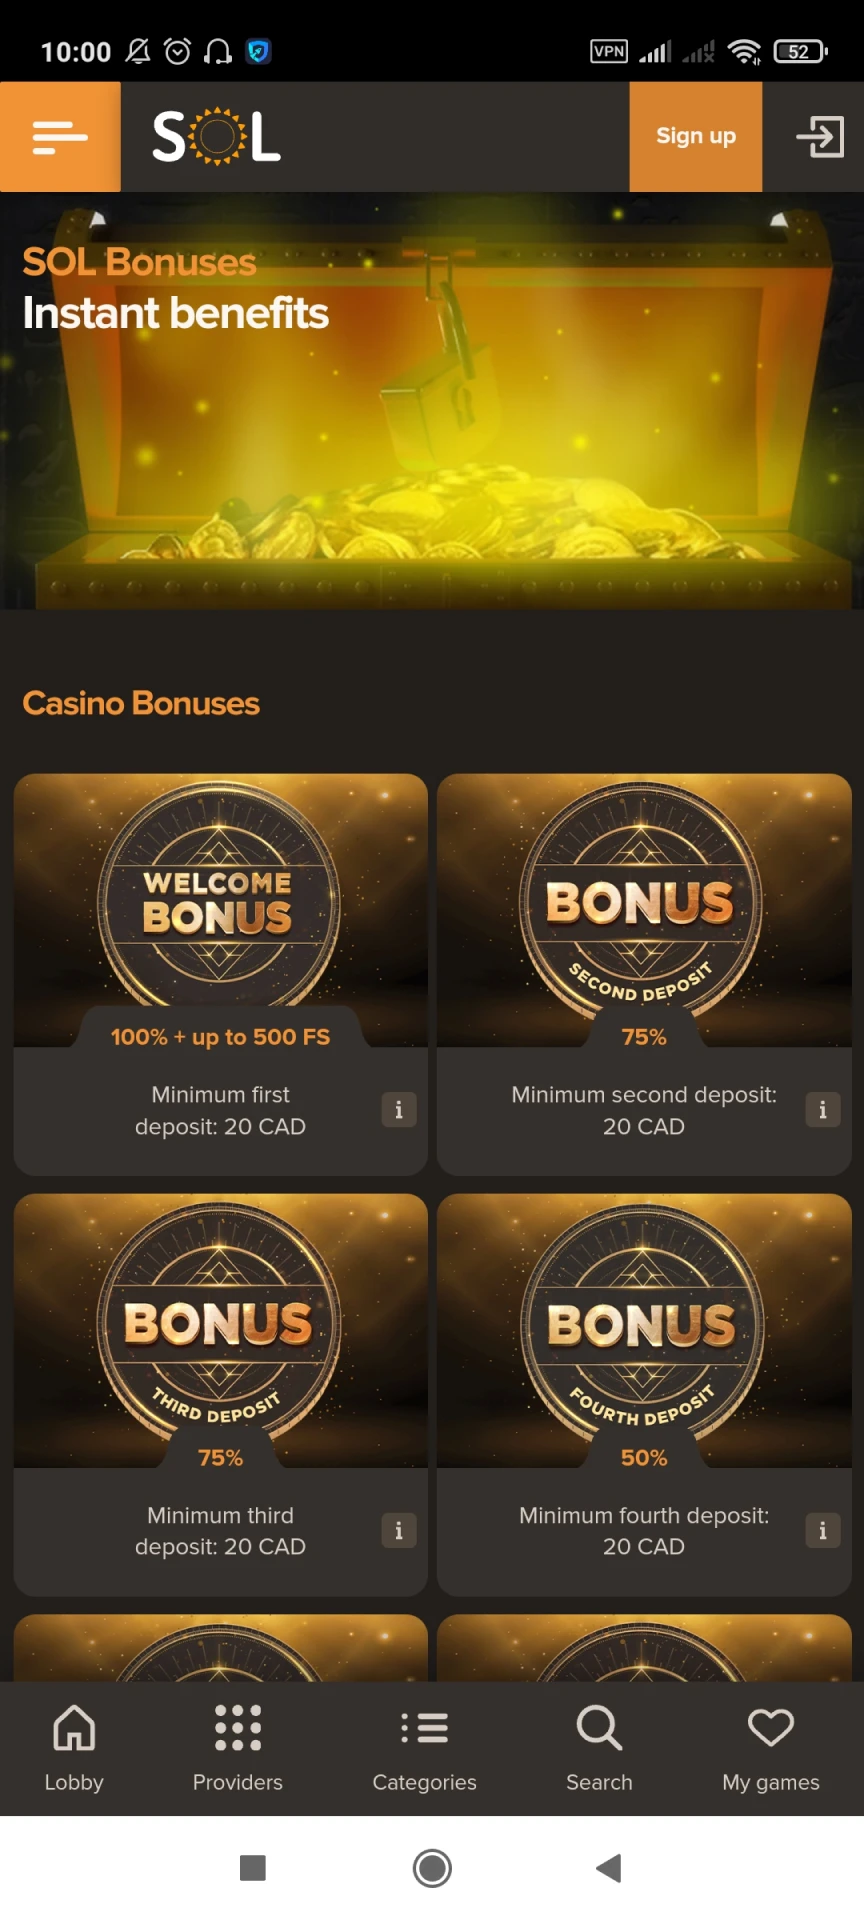 Visit the Bonuses page of the Sol Casino app.